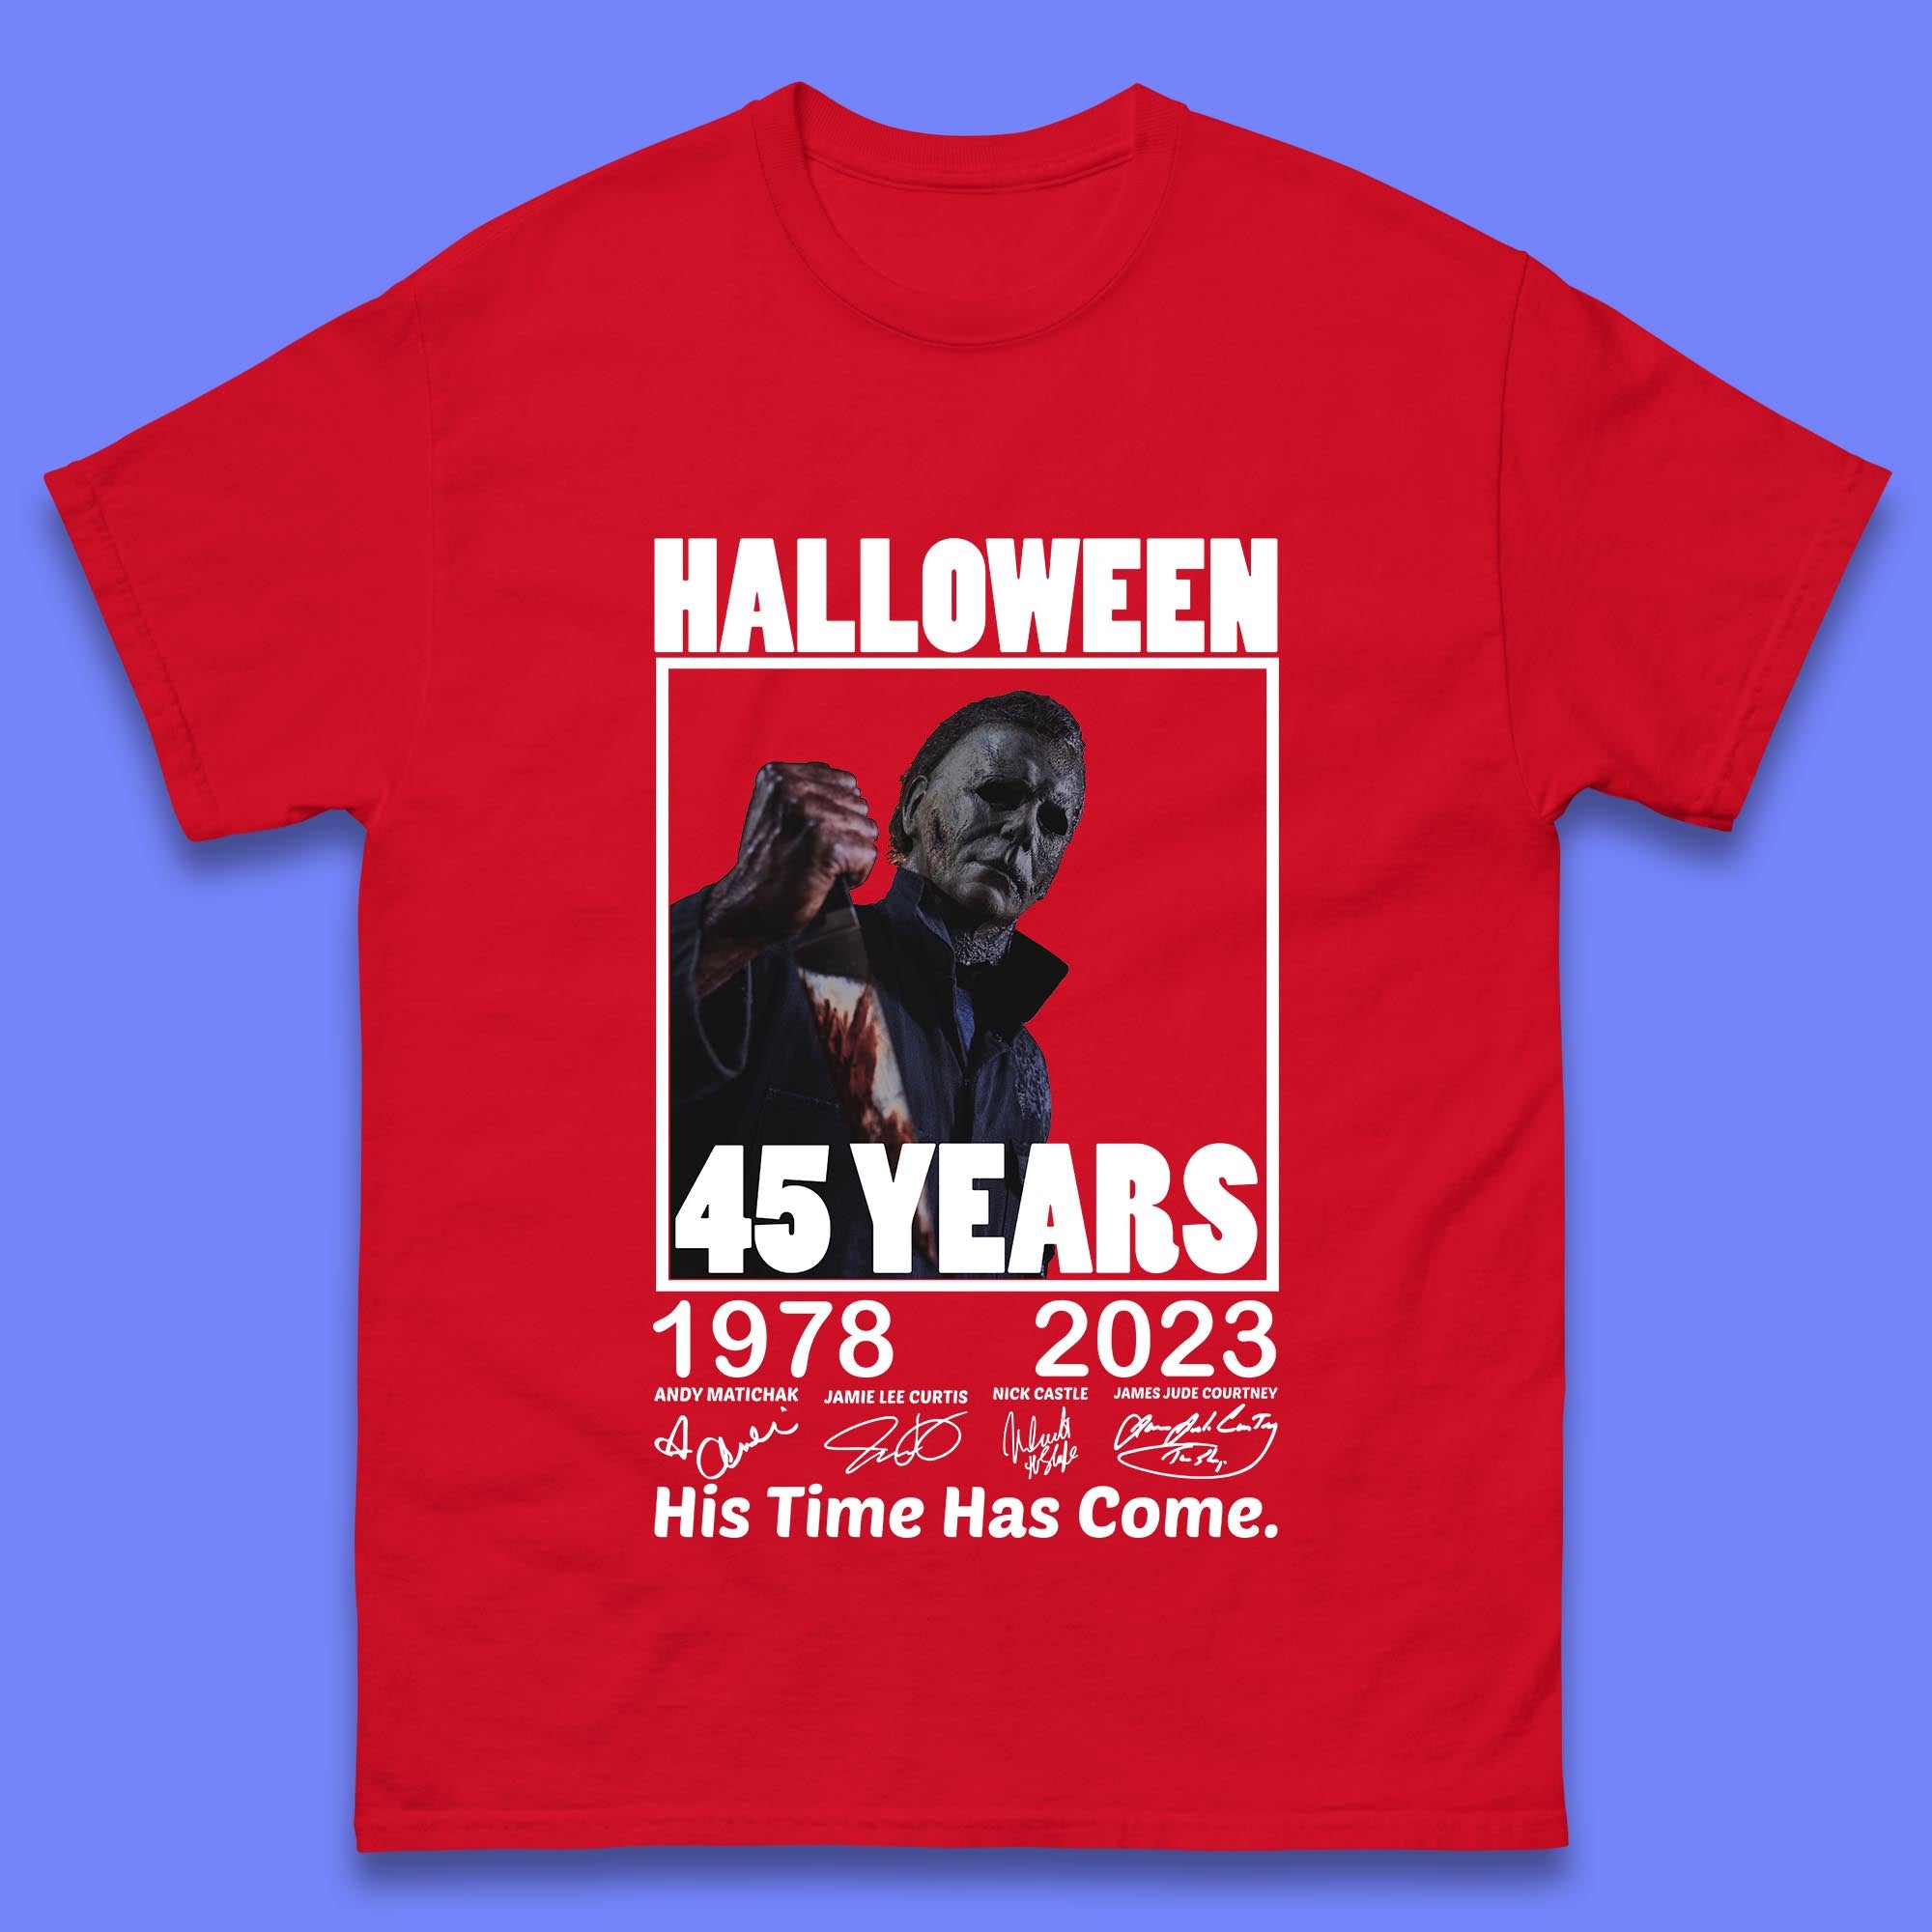 Michael Myers Fictional Character Signatures Halloween 45 Years 1978-2023 His Time Has Come Scary Movie  Mens Tee Top